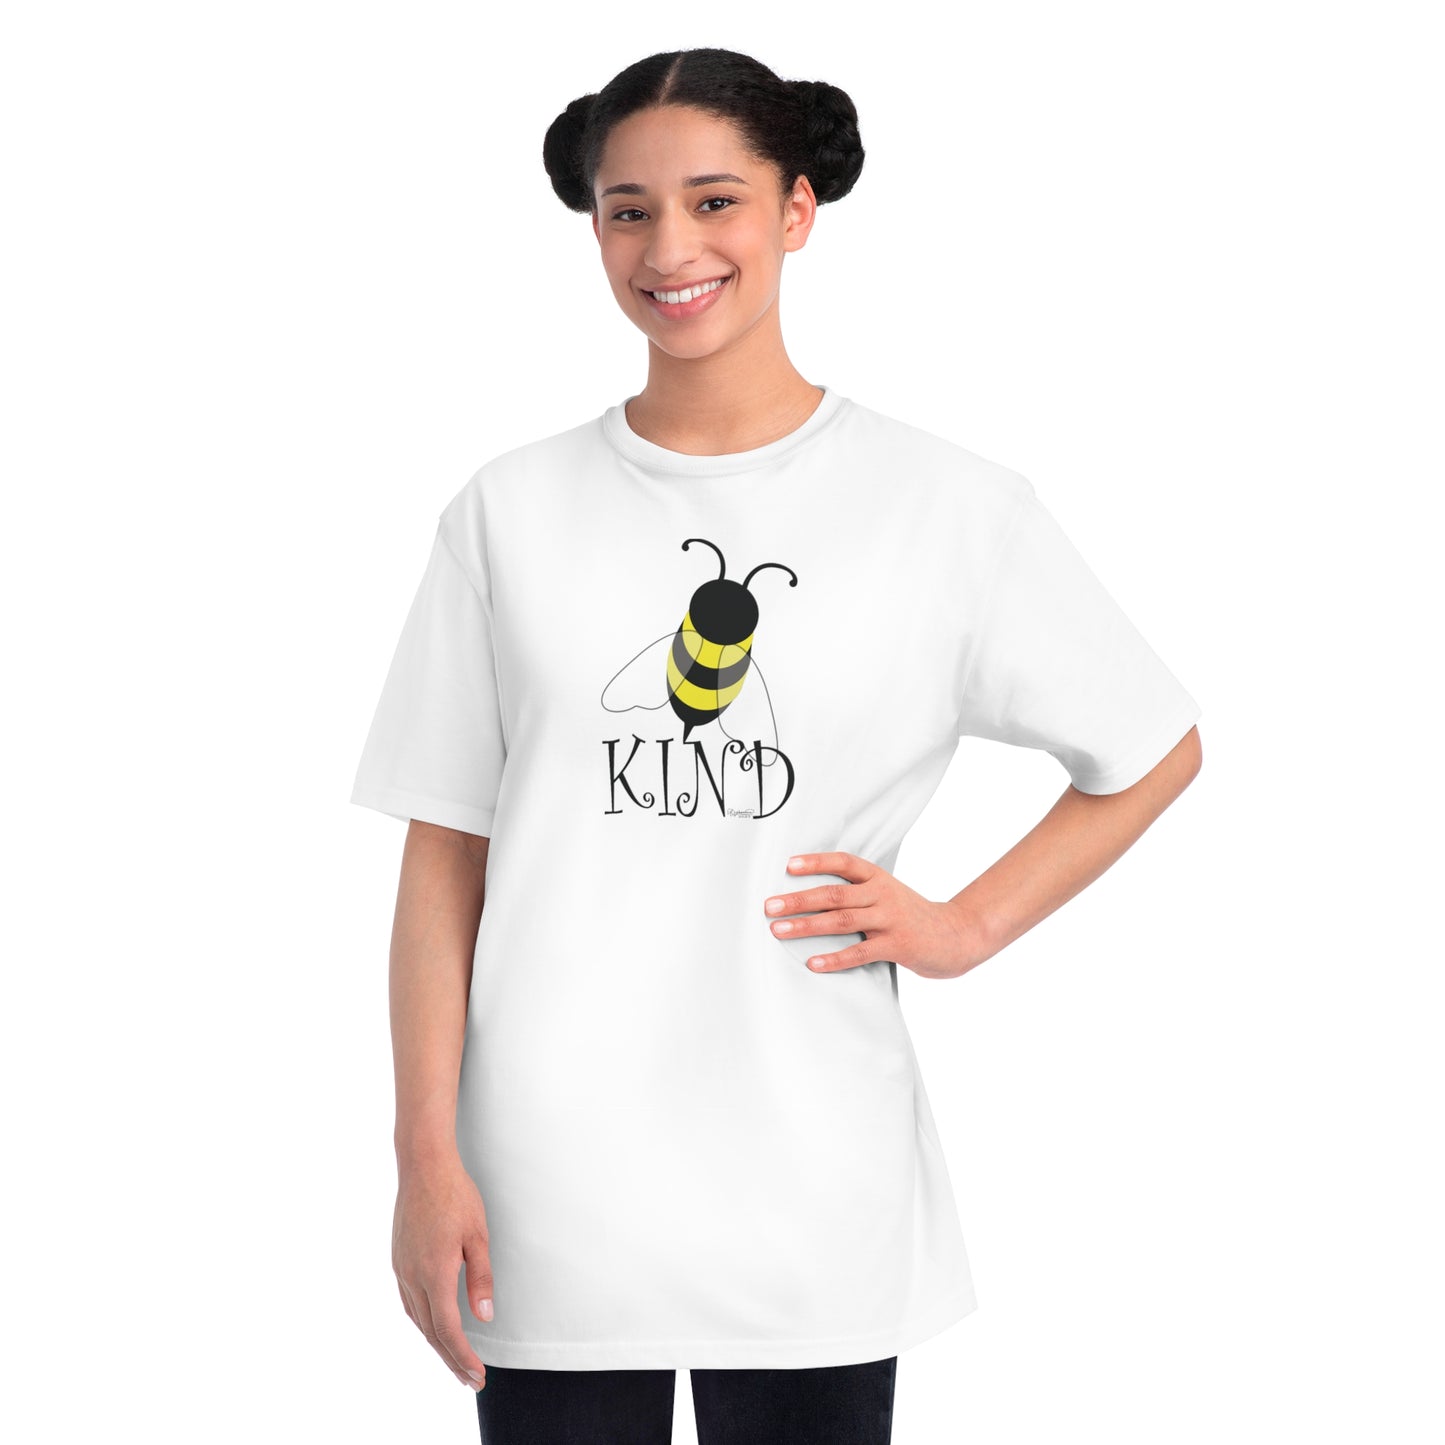 Bee Kind: The Organic Cotton Unisex Classic T-Shirt That Inspires Compassion